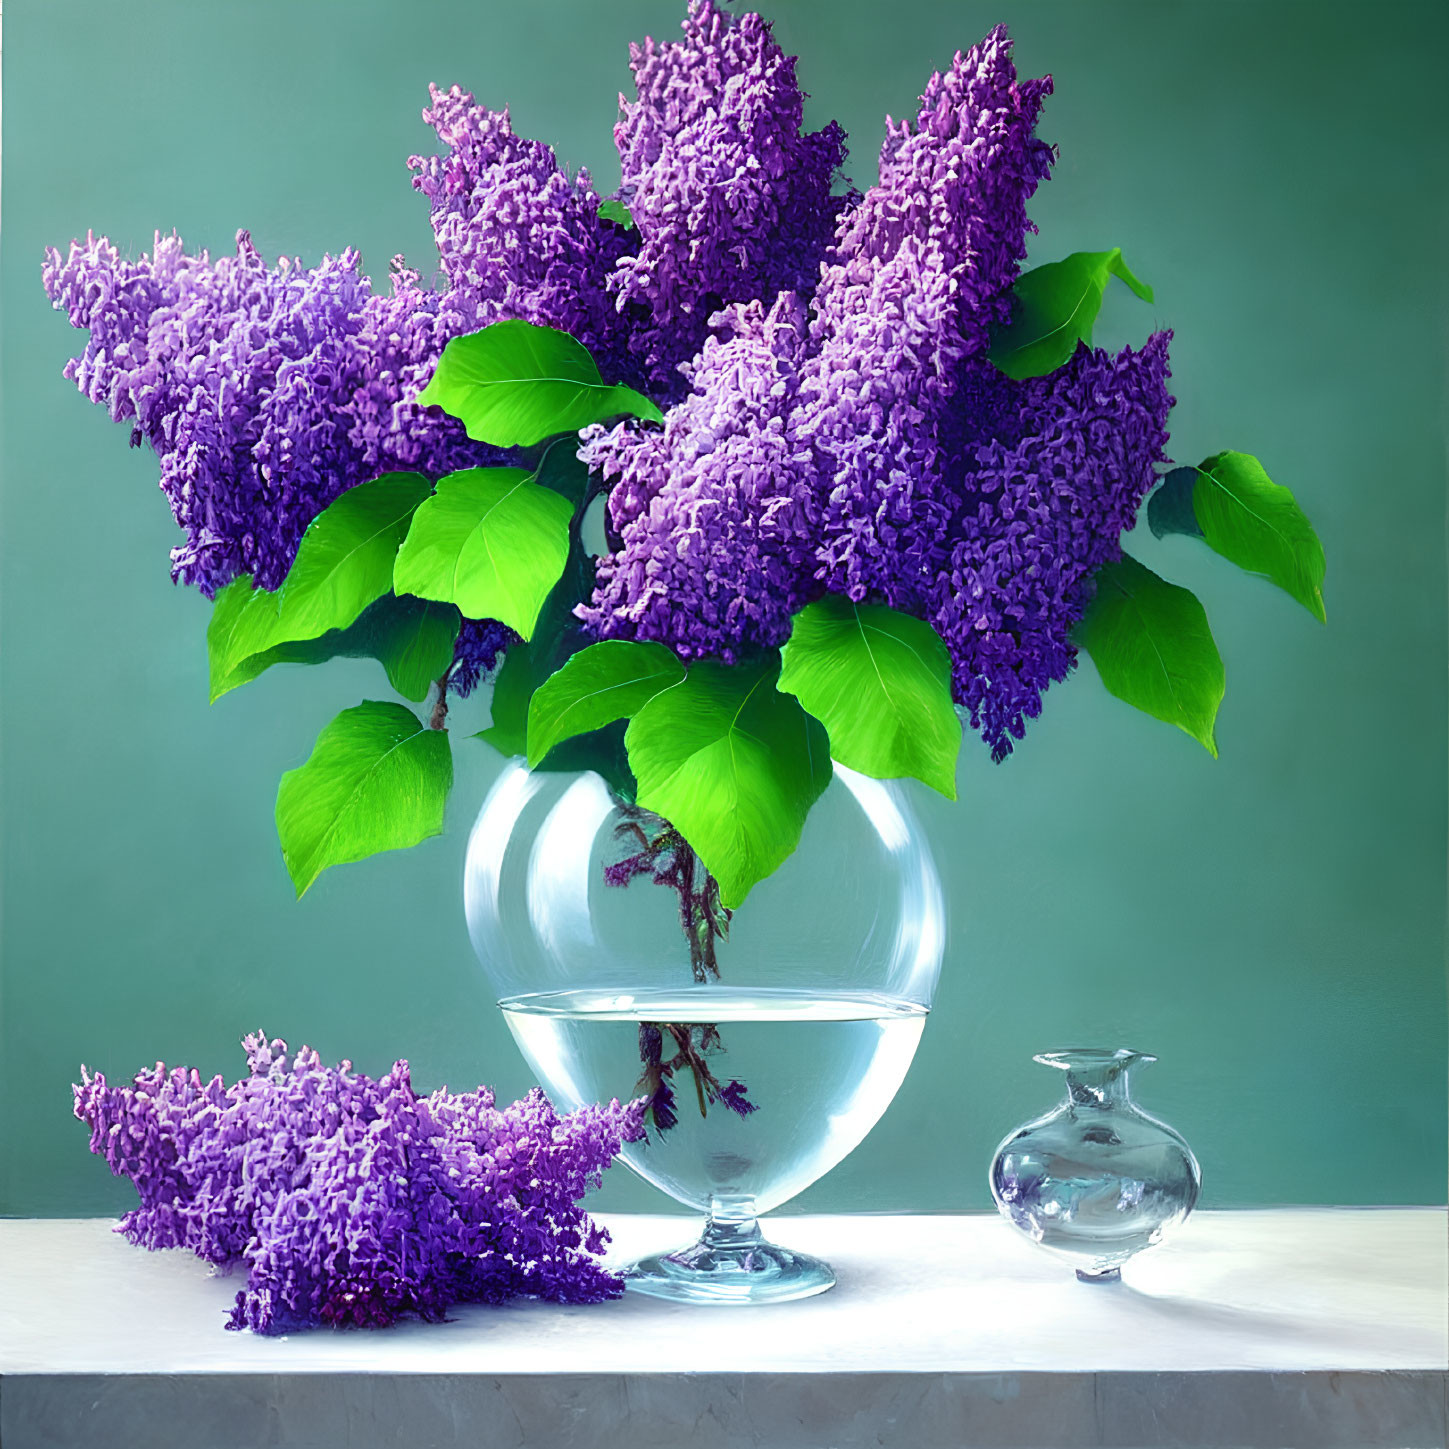 Purple lilacs in glass vase on table with green leaves and fallen blossoms against muted green background